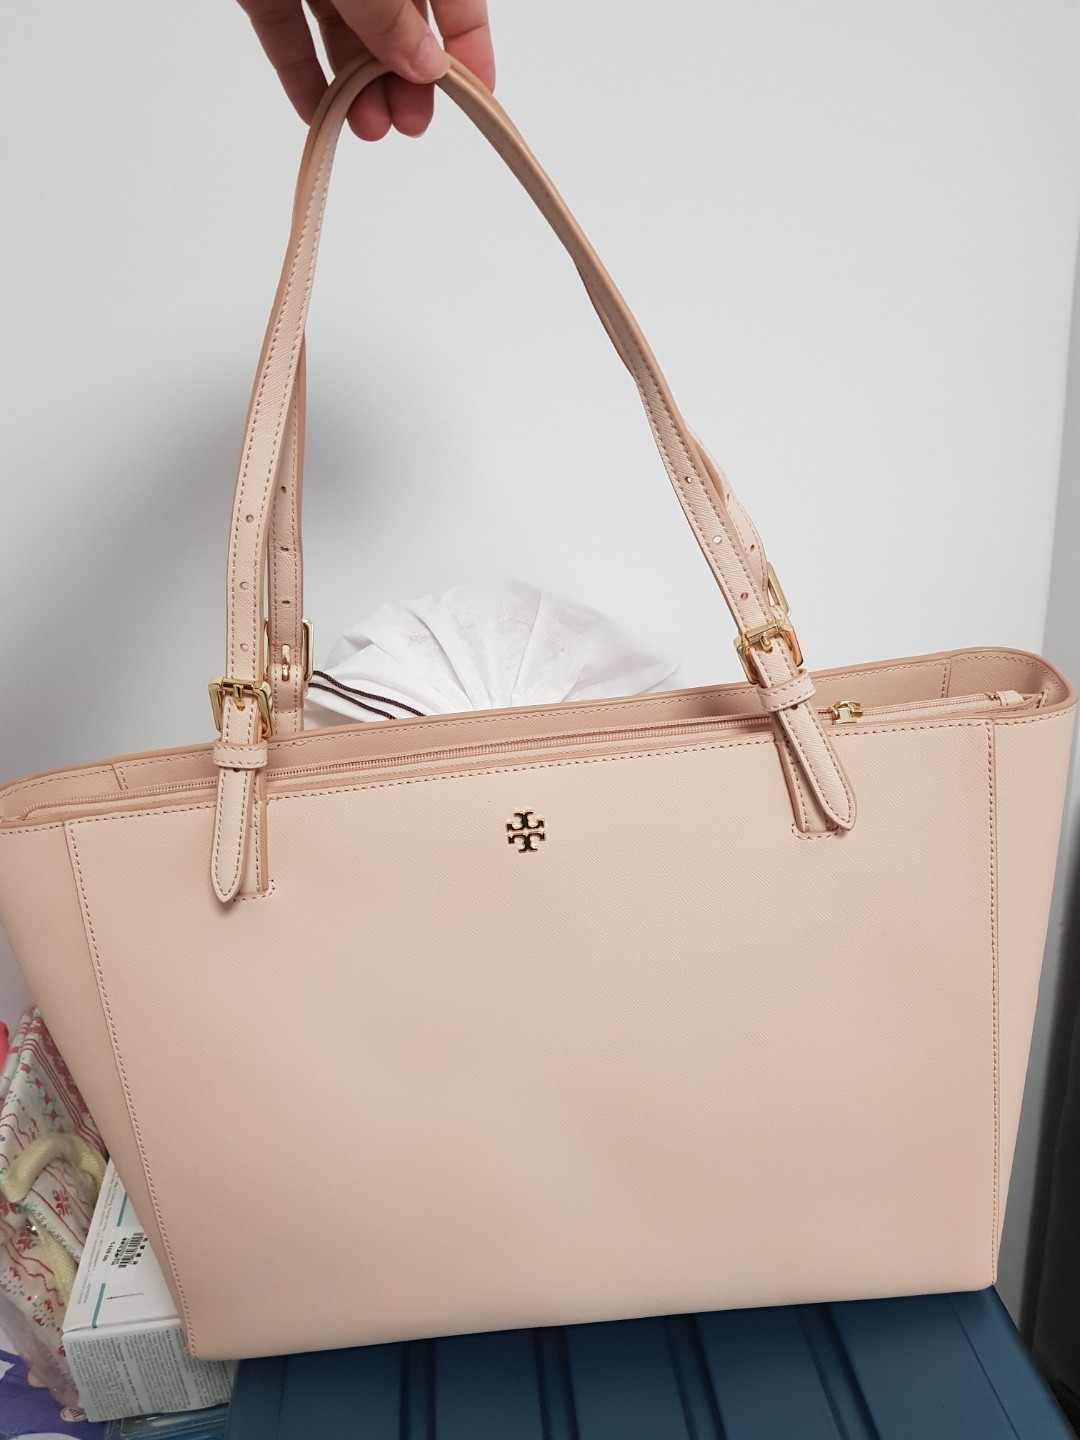 Tory Burch Small York Saffiano Leather Buckle Tote, $245